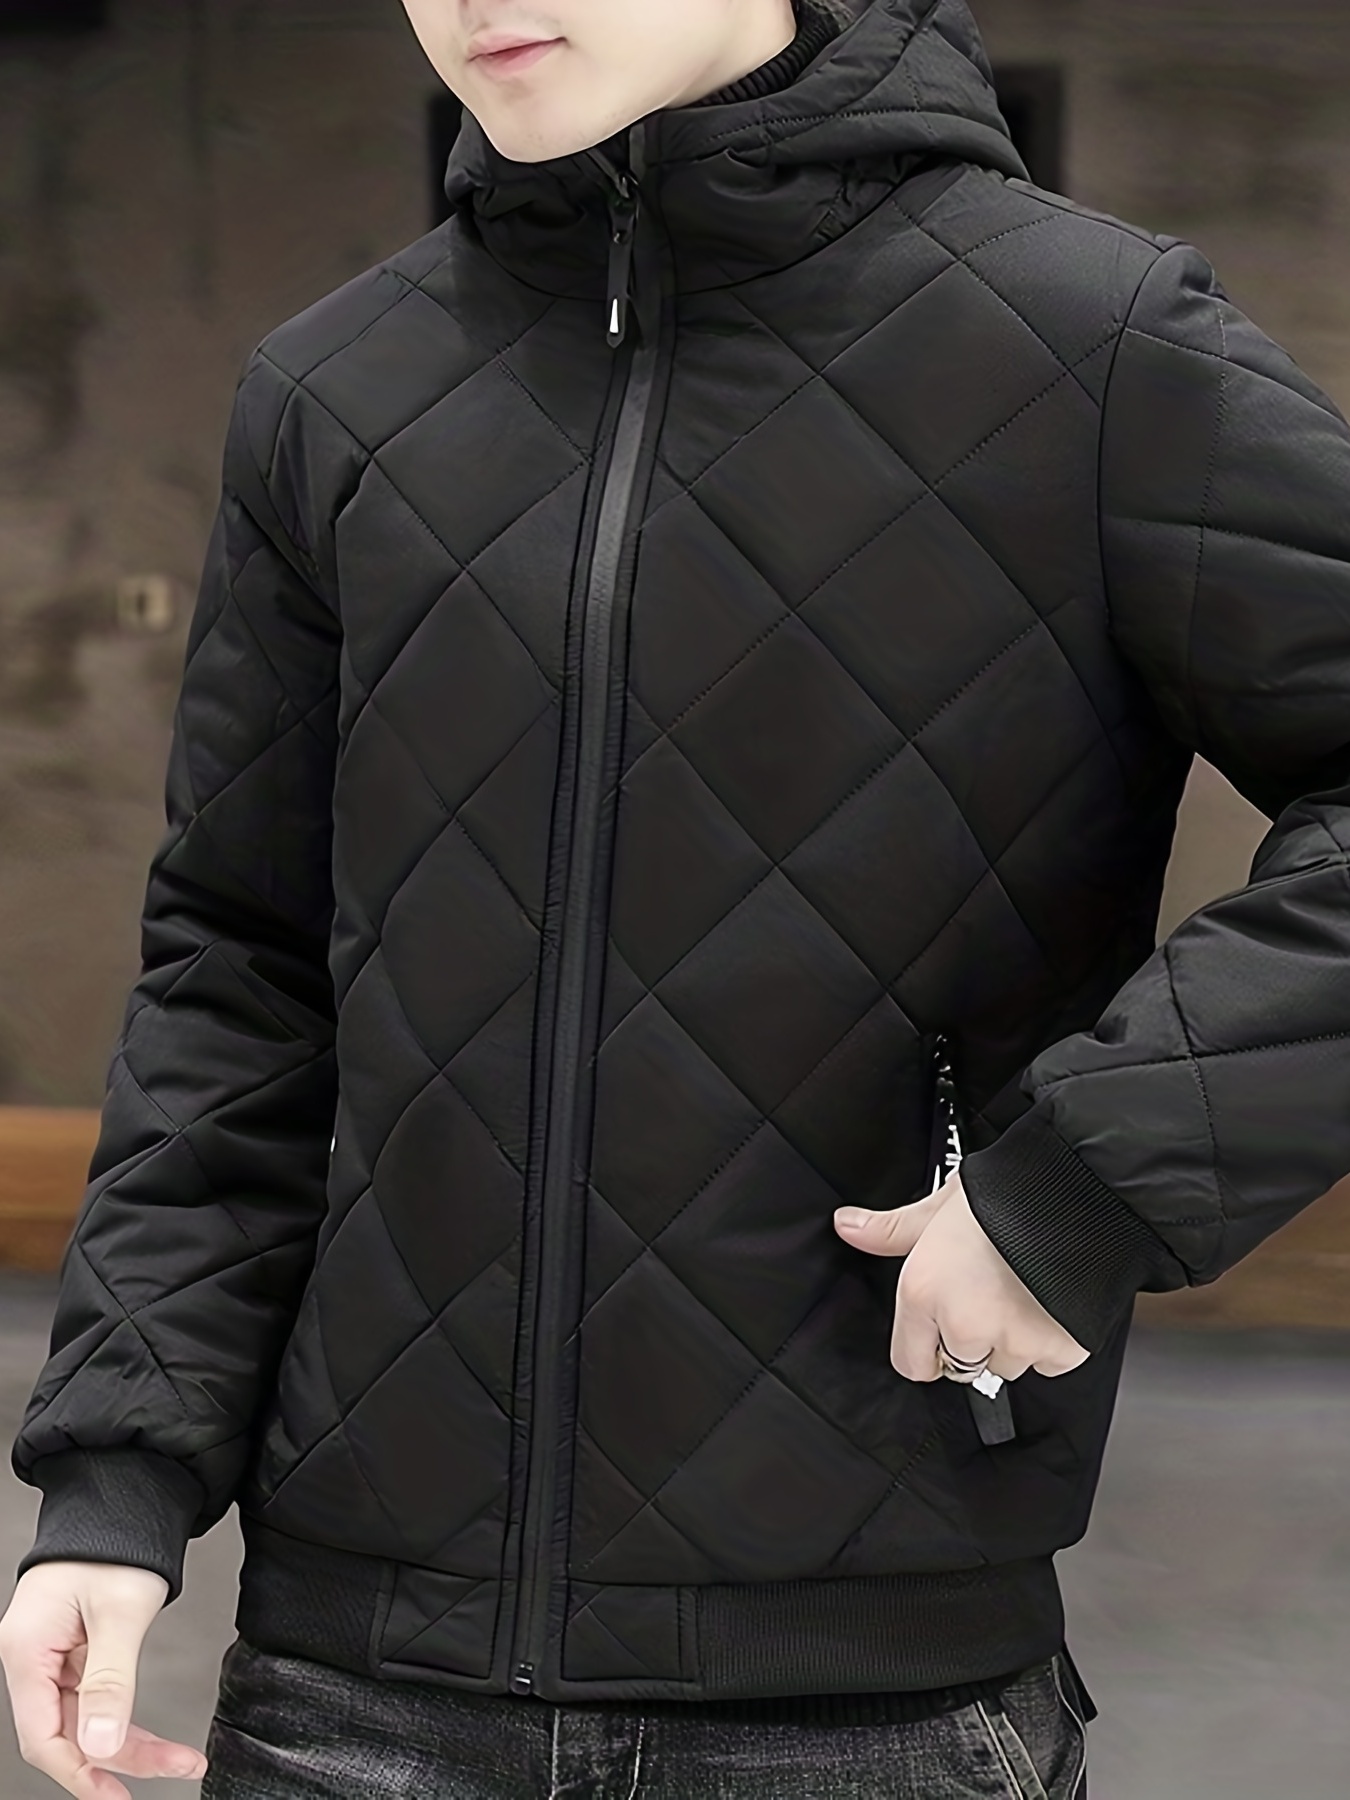 Quilted Winter Jacket Adult